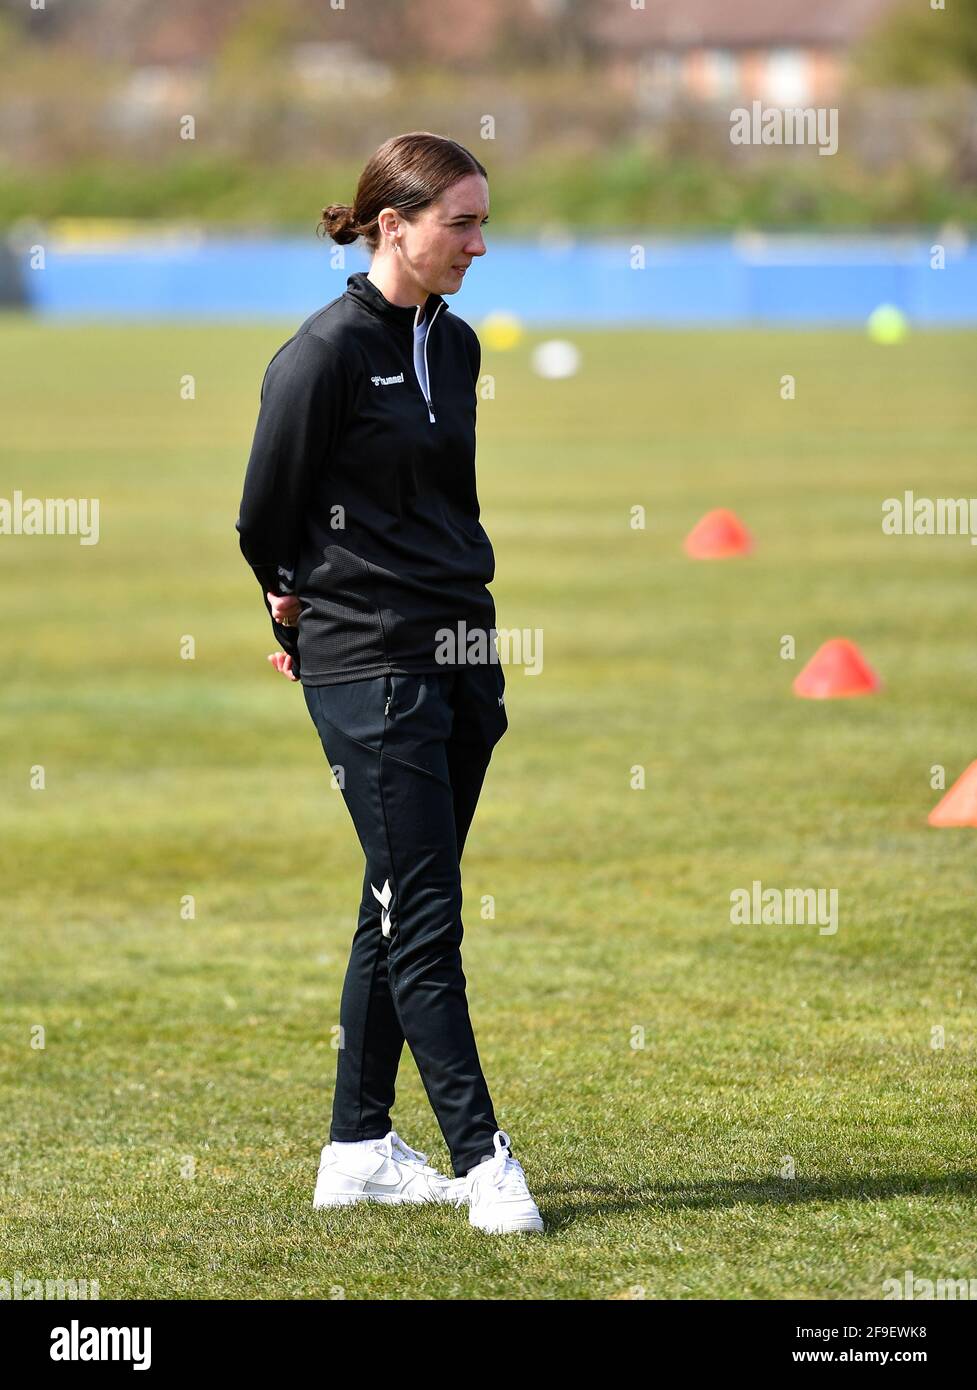 Middlesborough, UK. 18th Apr, 2021. Steph Turnbull (Middlesborough Manager) prior to the Vitality Womens FA Cup fourth round match between Middlesborough and Sheffield United at the Bedford Terrace in Middlesborough, England. Credit: SPP Sport Press Photo. /Alamy Live News Stock Photo